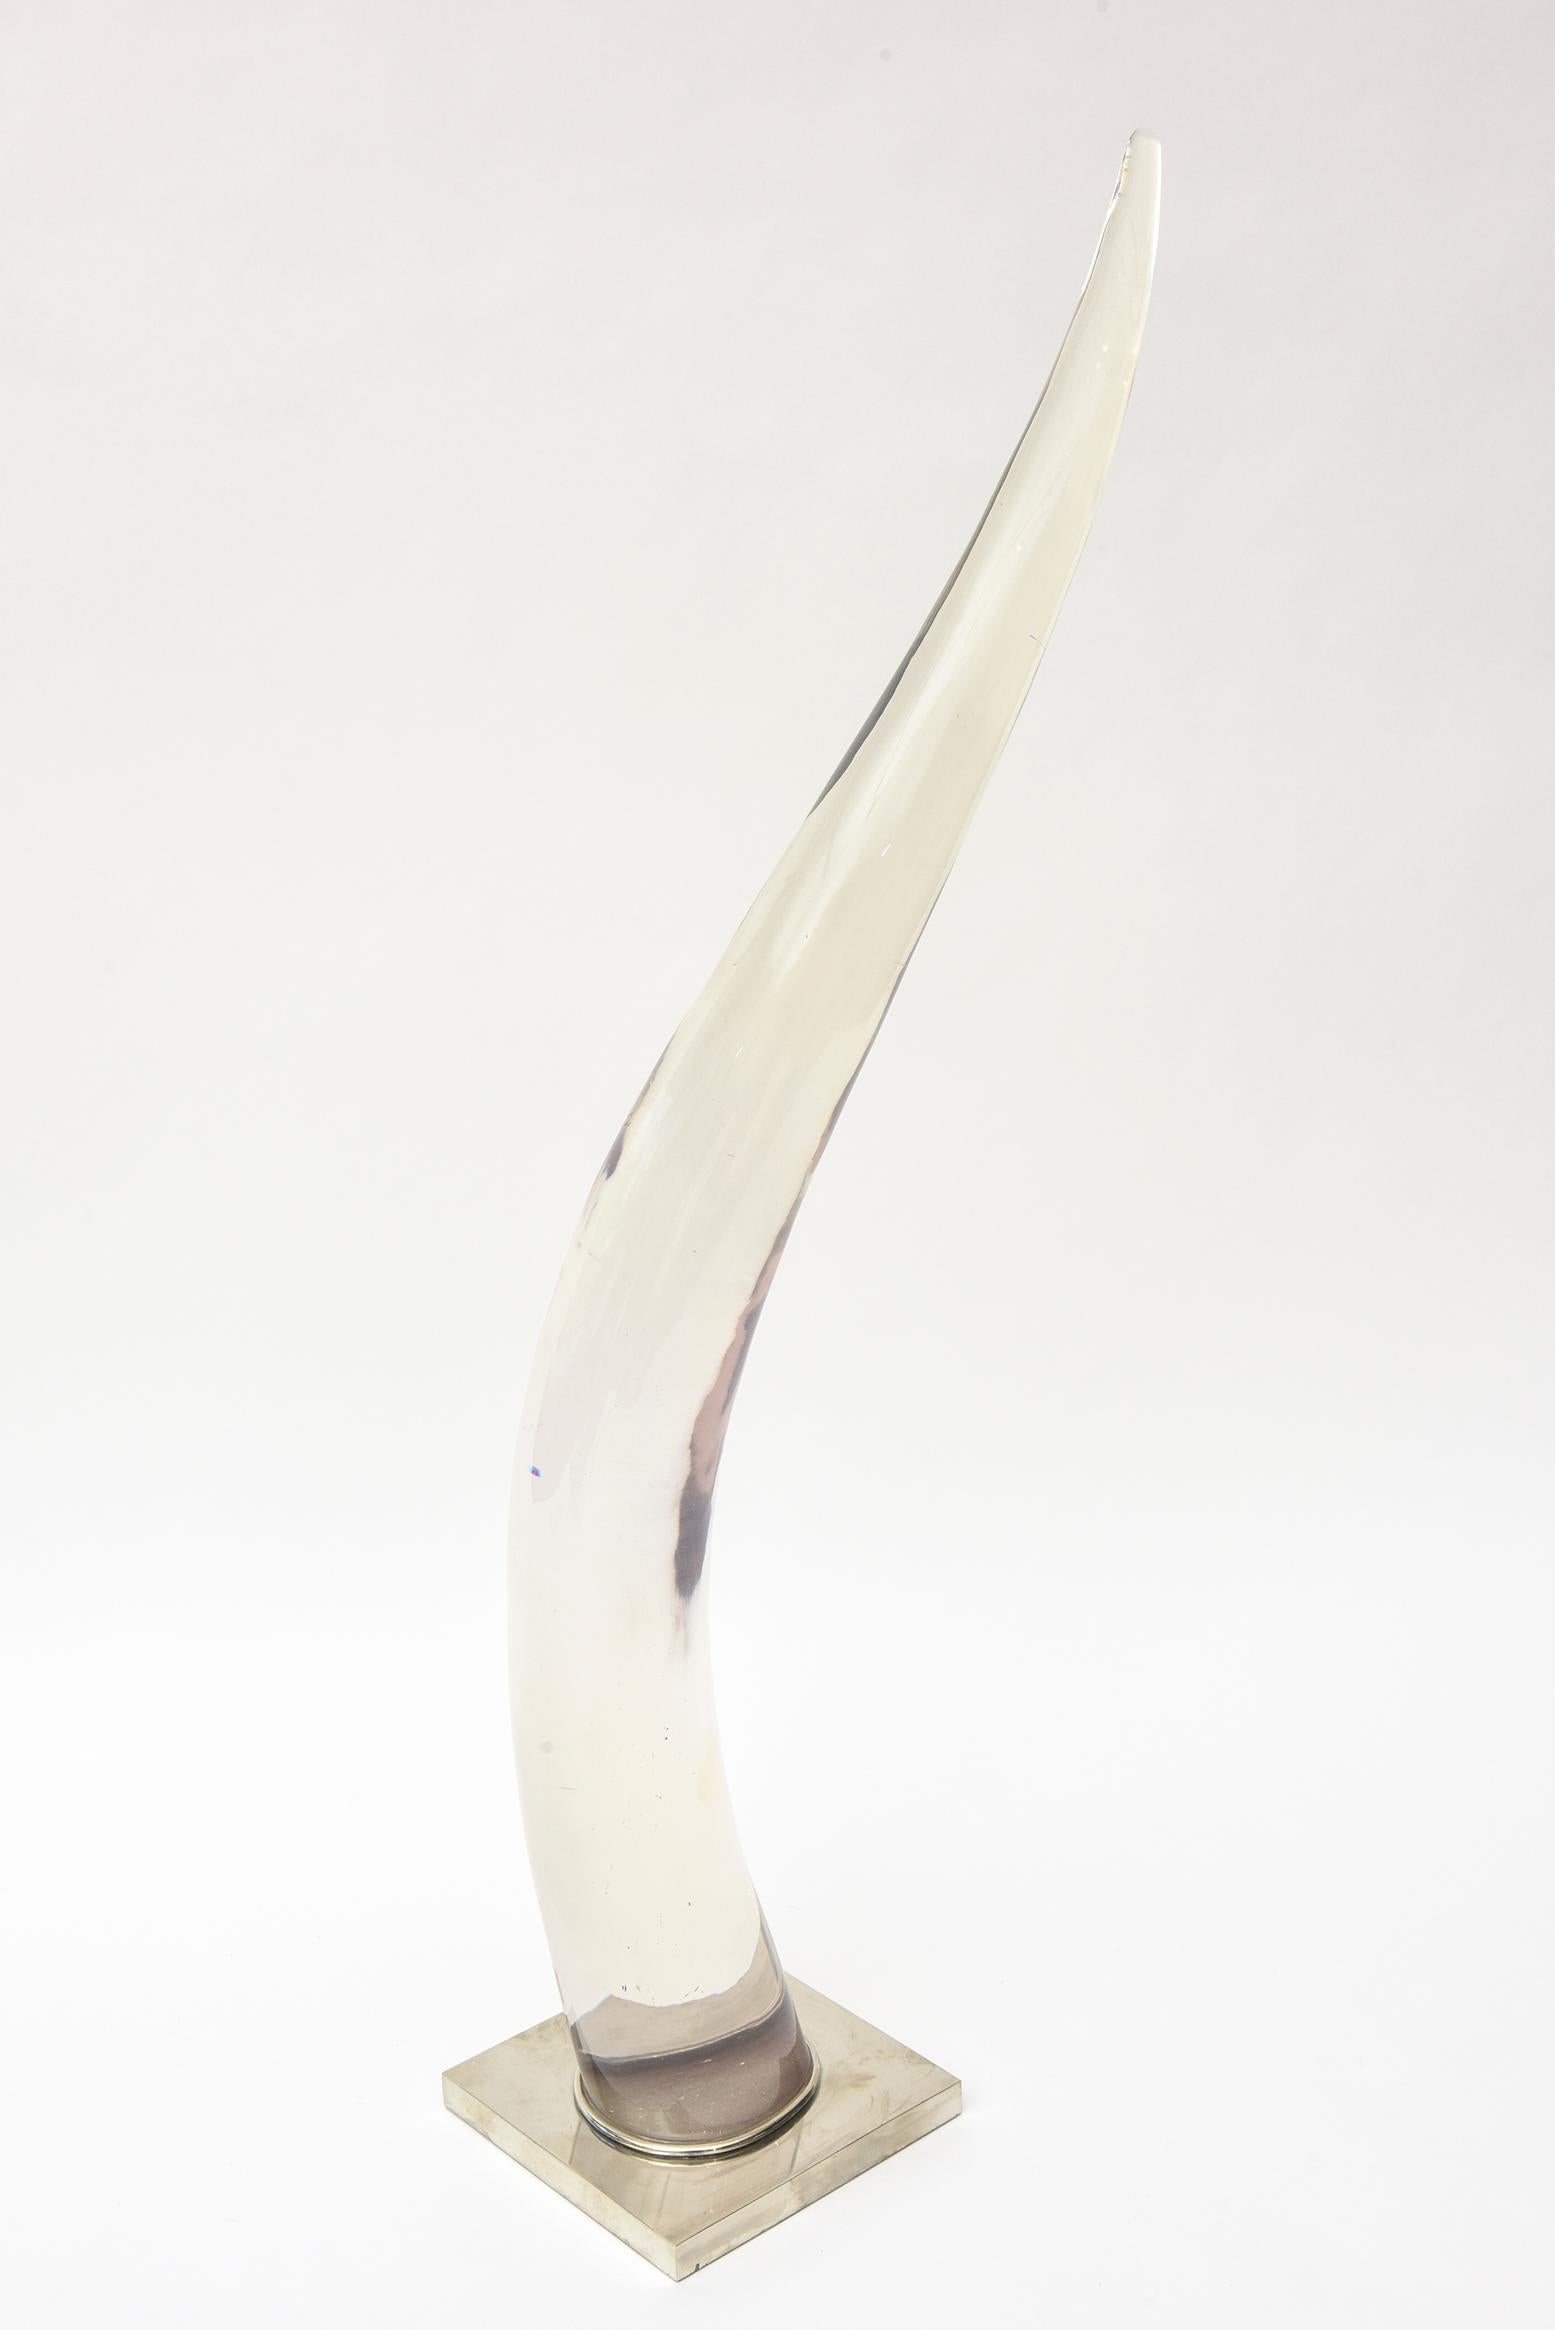 This special tall lucite and silver plate elegant and organic arched sculpture was designed by Catherine Noll whose famous grandfather was Alexandre Noll. He was a well know sculptor who made fabulous sculptures out of carving simple wood. This